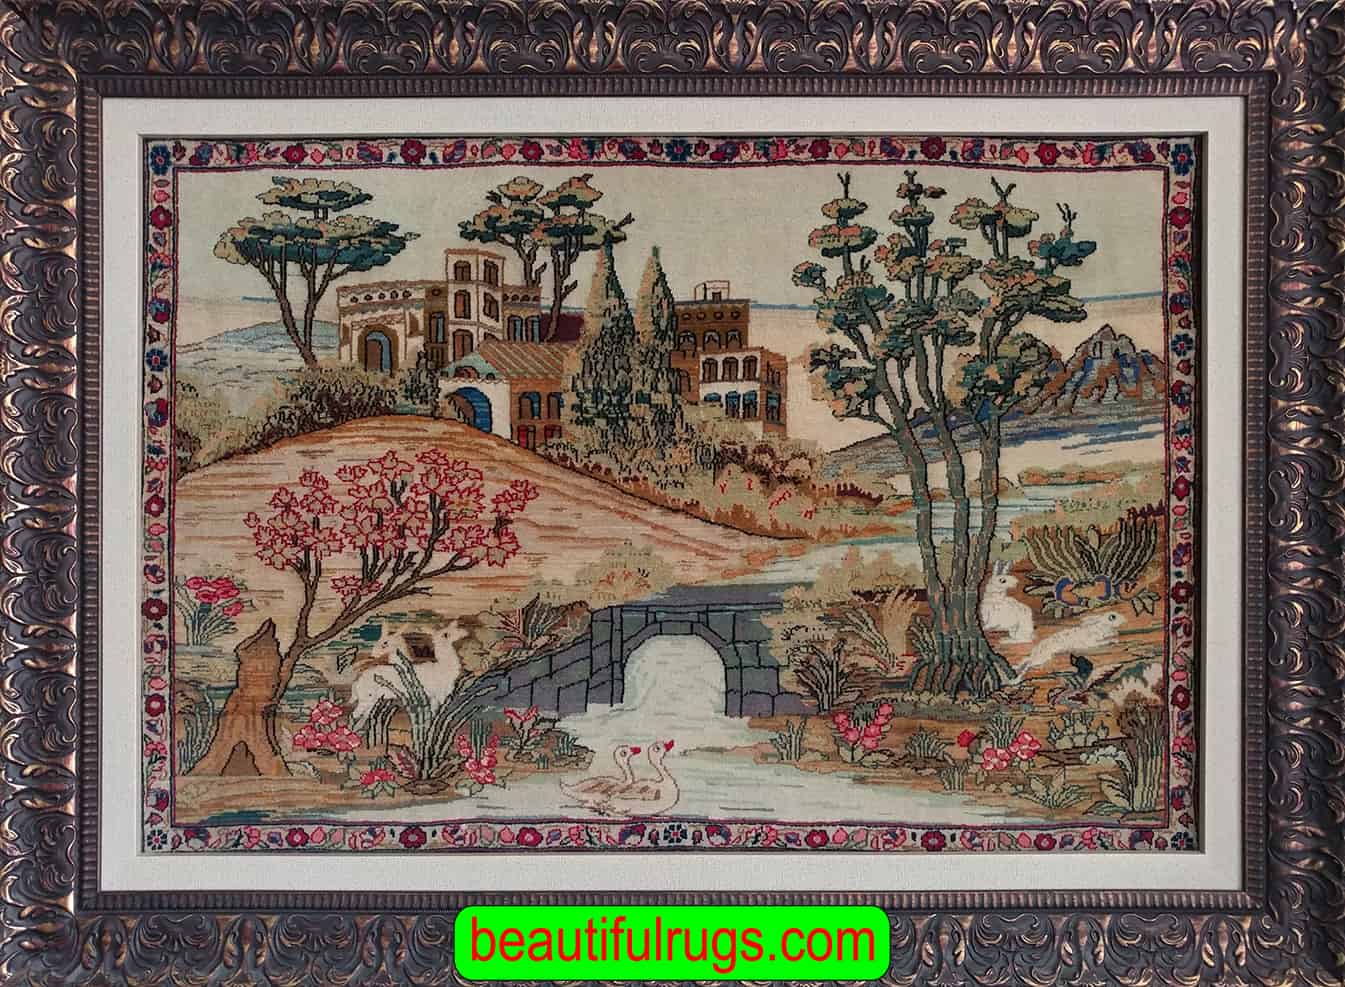 Wall-Hanging Rug, Antique Persian Kashan Scenery Rug in a picture frame. Size 3.4x2.3